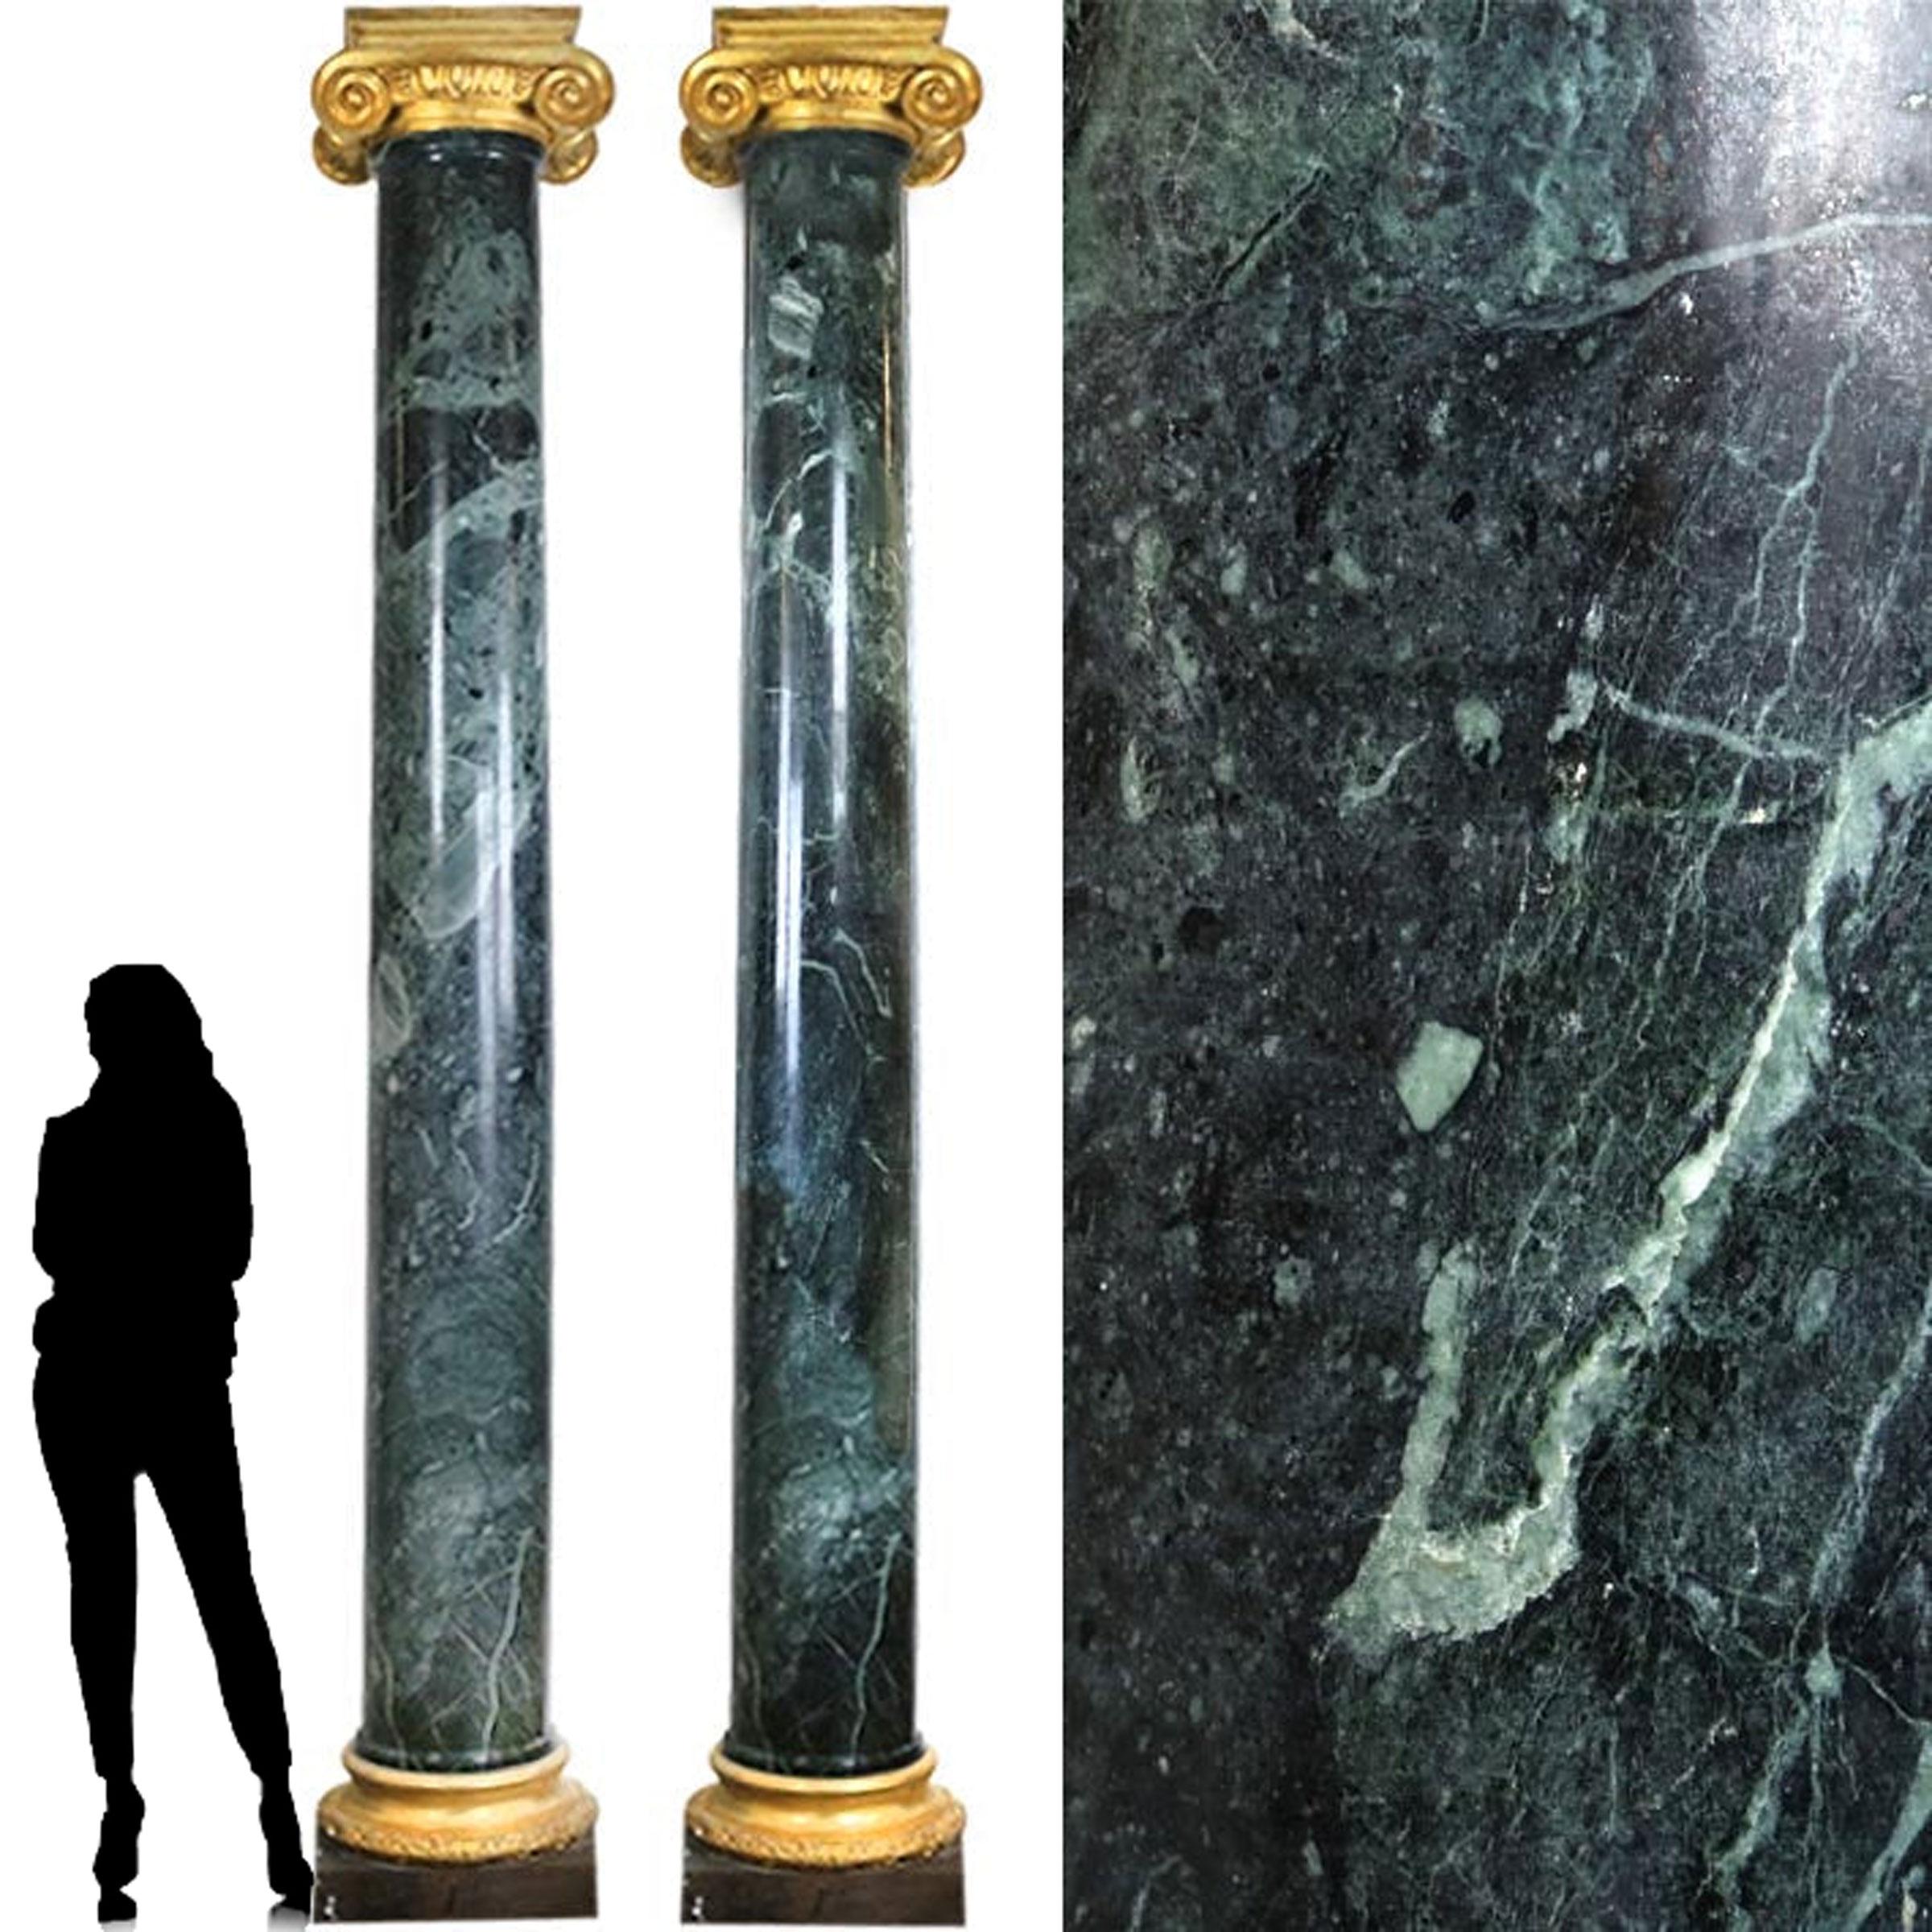 A spectacular pair of green marble columns with steel and gilded bases and capitals.

Leaf garland, egg and dart borders and scrolls adorn the capitals and base of these substantial pillars. 

Wonderfully veined and dappled verde marble. The grand